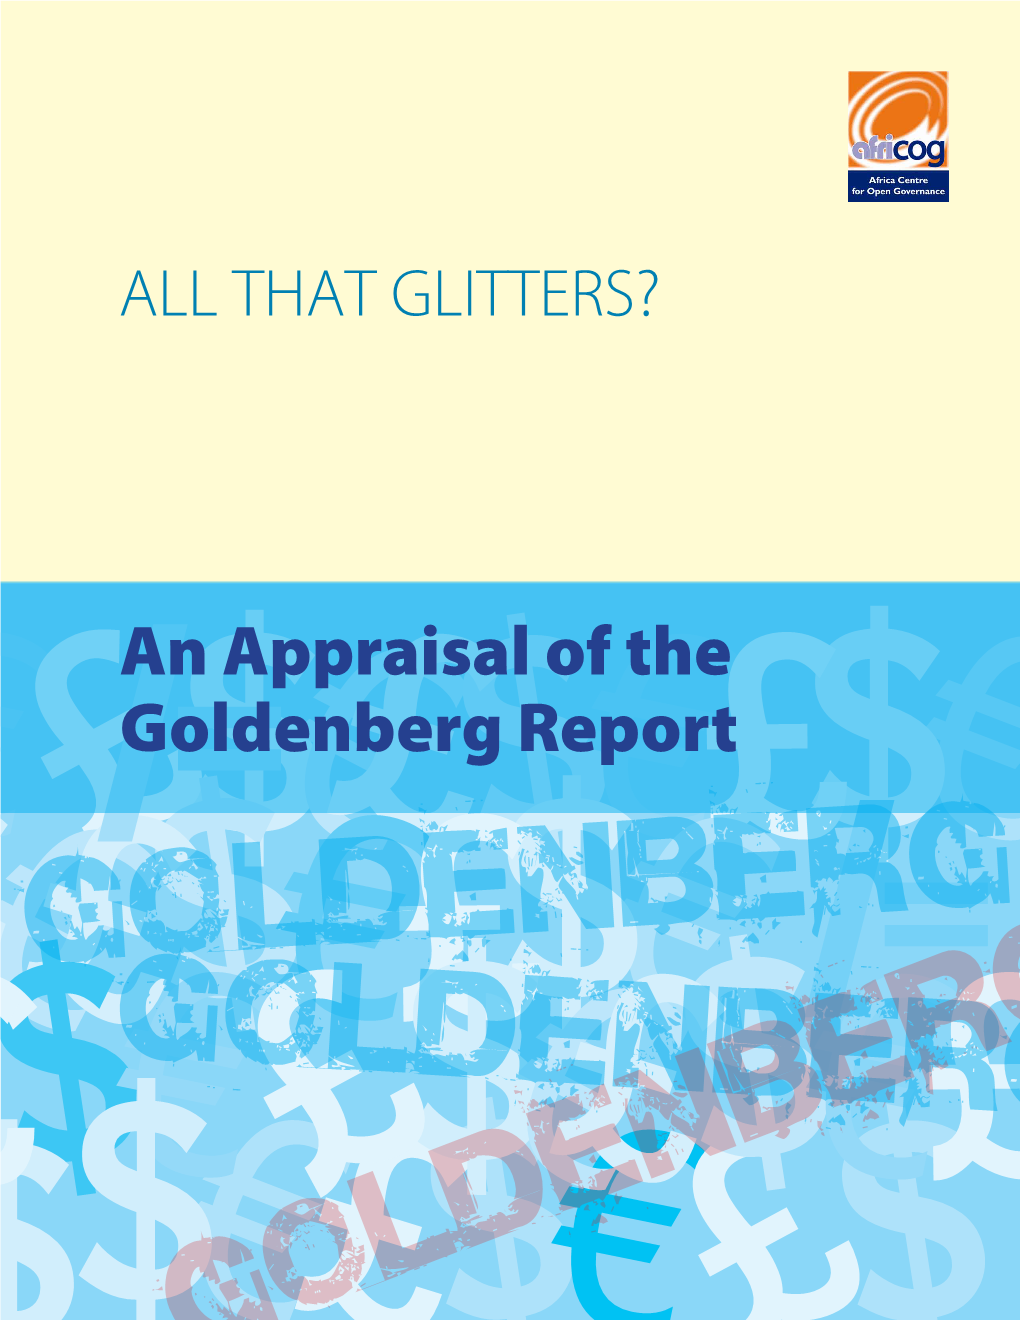 An Appraisal of the Goldenberg Report ALL THAT GLITTERS?